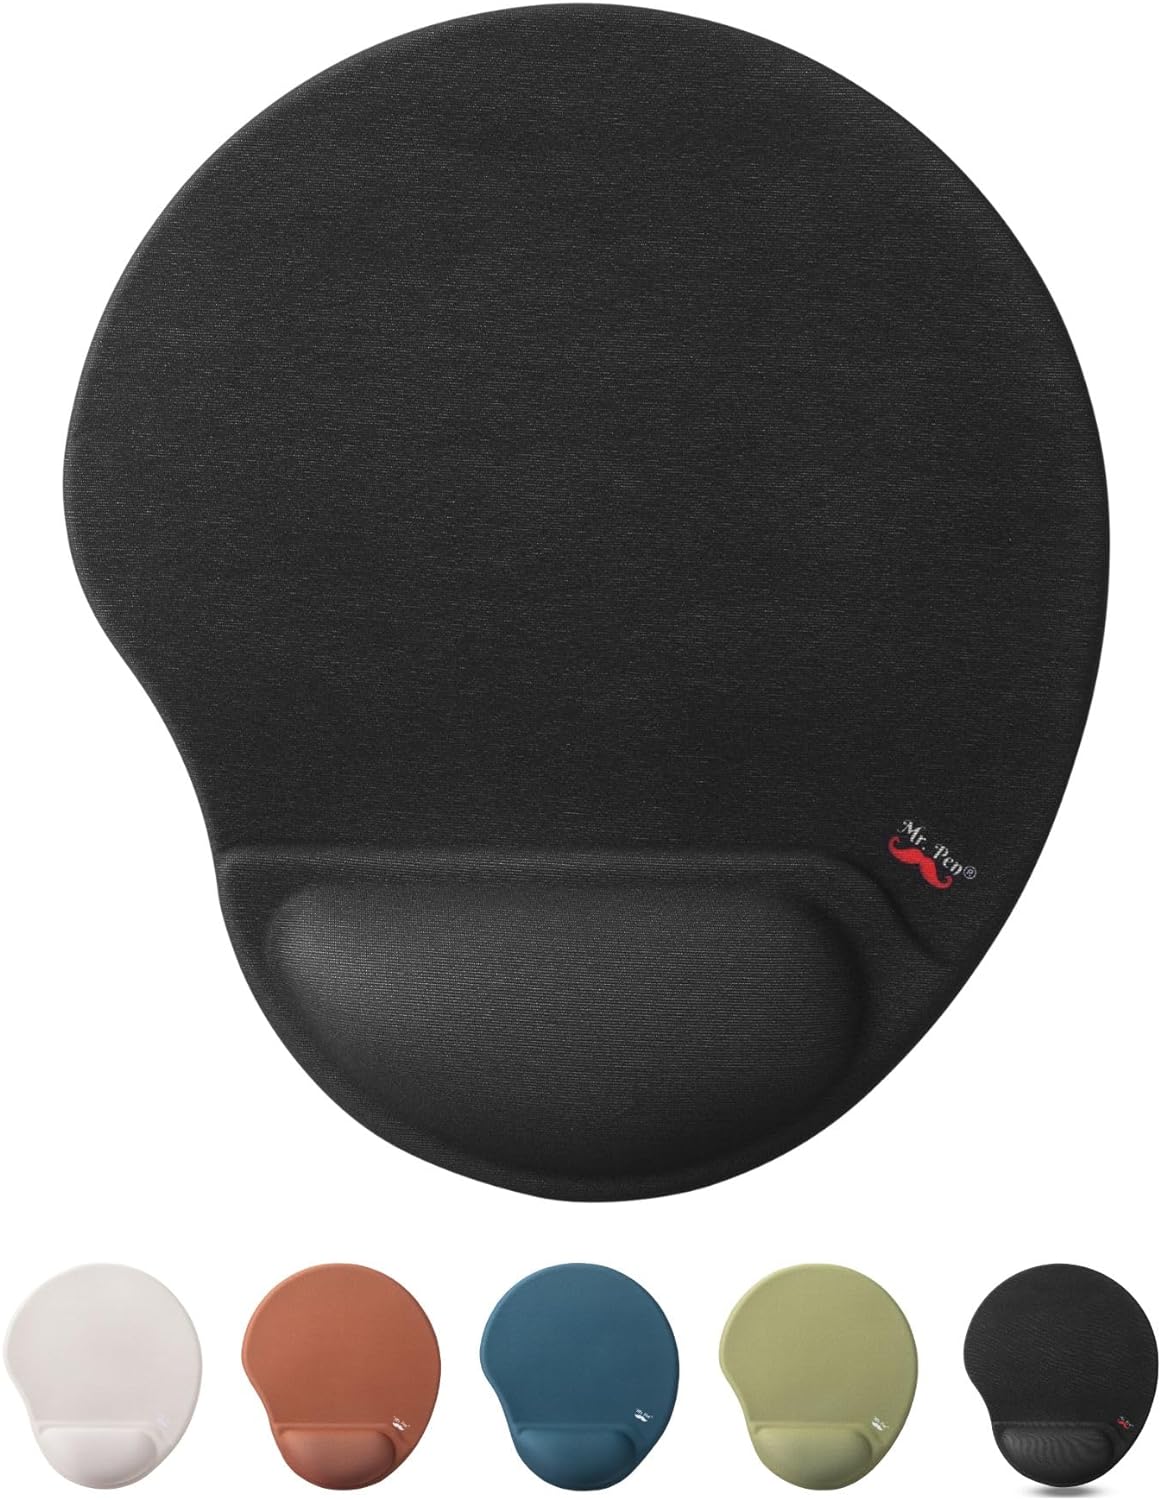 Mouse Pad with Wrist Support, Brown, Ergonomic Mouse Pad Wrist Support, Gel Mouse Pad, Ergonomic Mouse Pad with Wrist Support, Gaming Mouse Pad with Wrist Support Mouse Pad